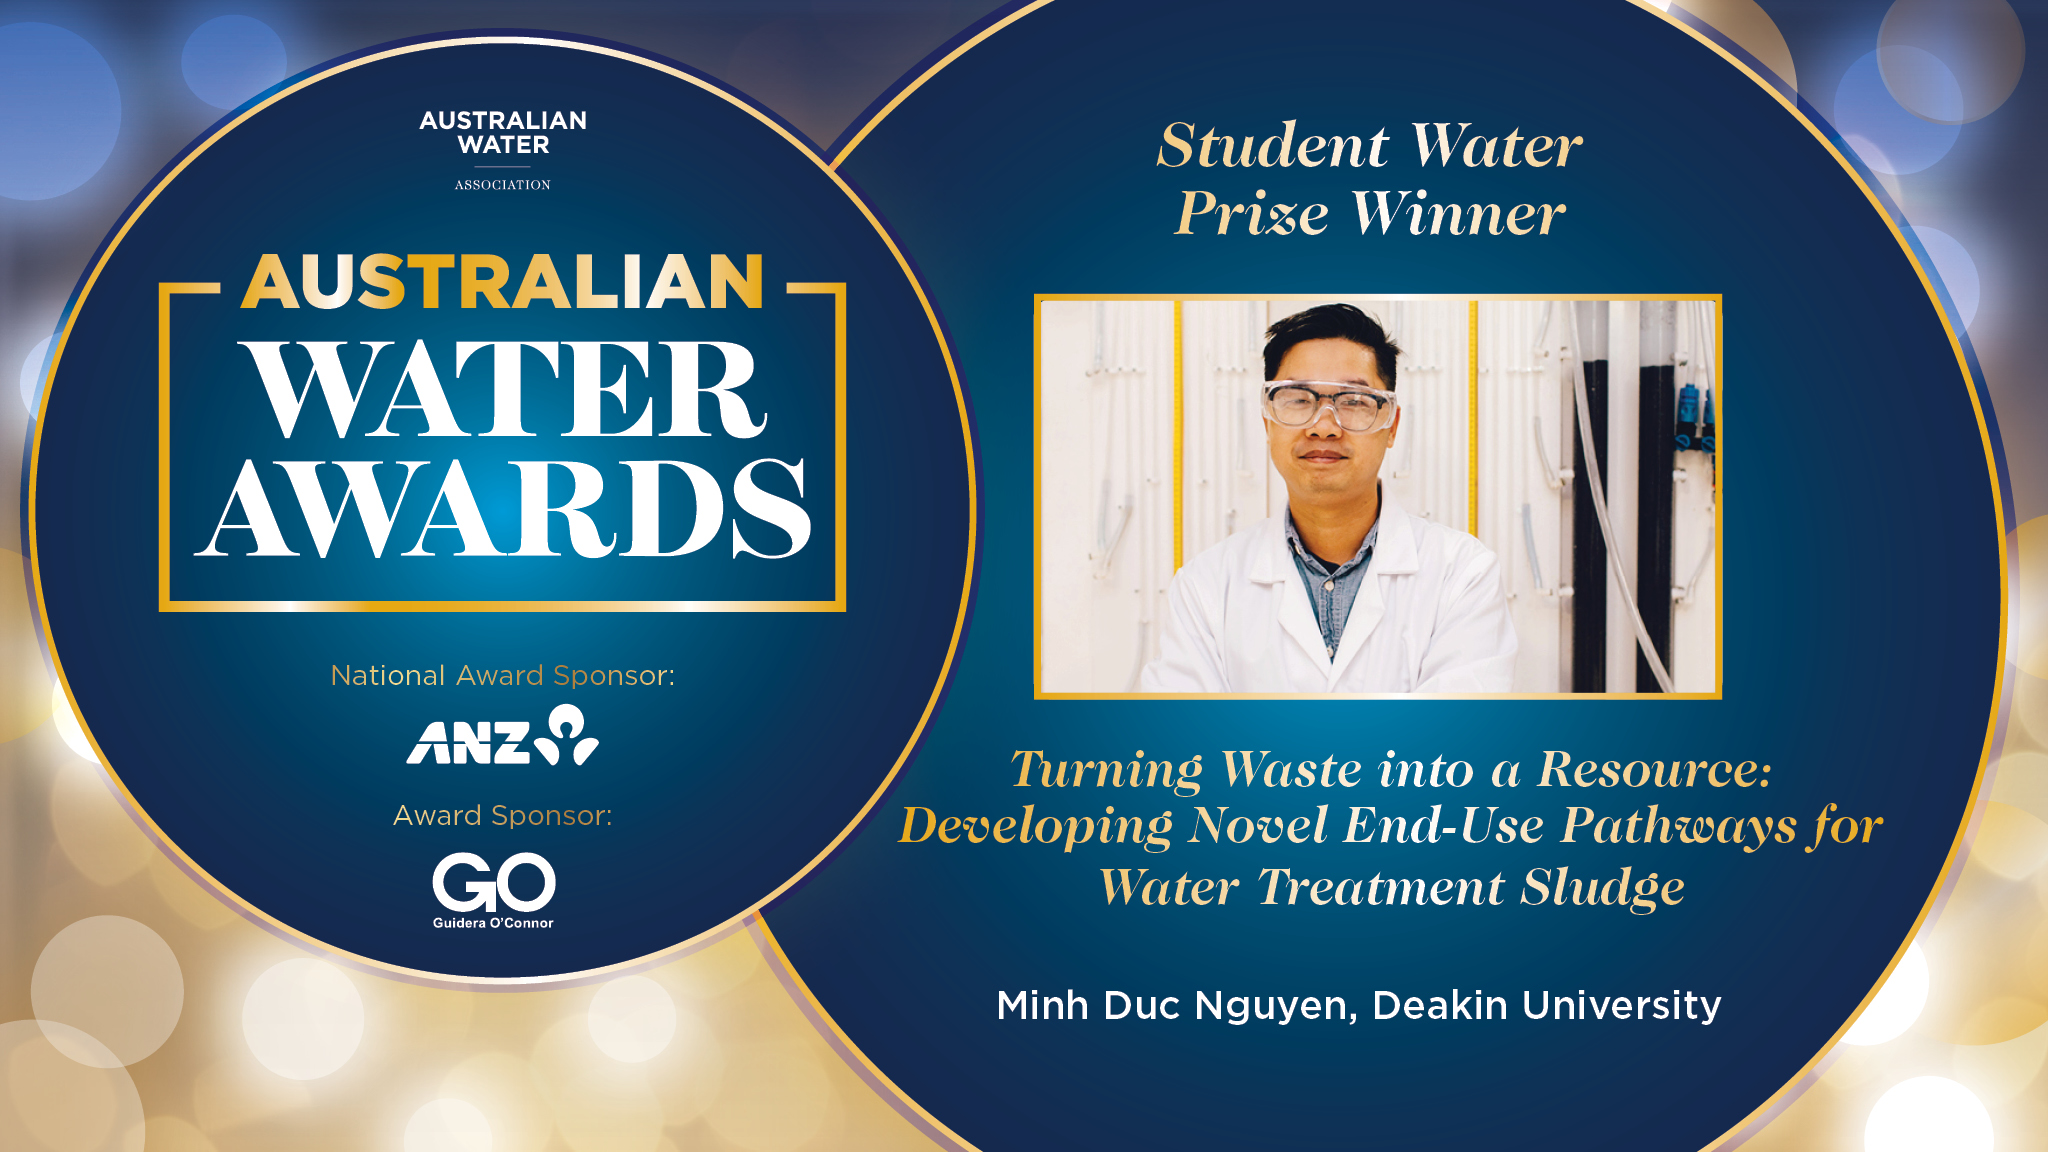 9. Student Water Prize